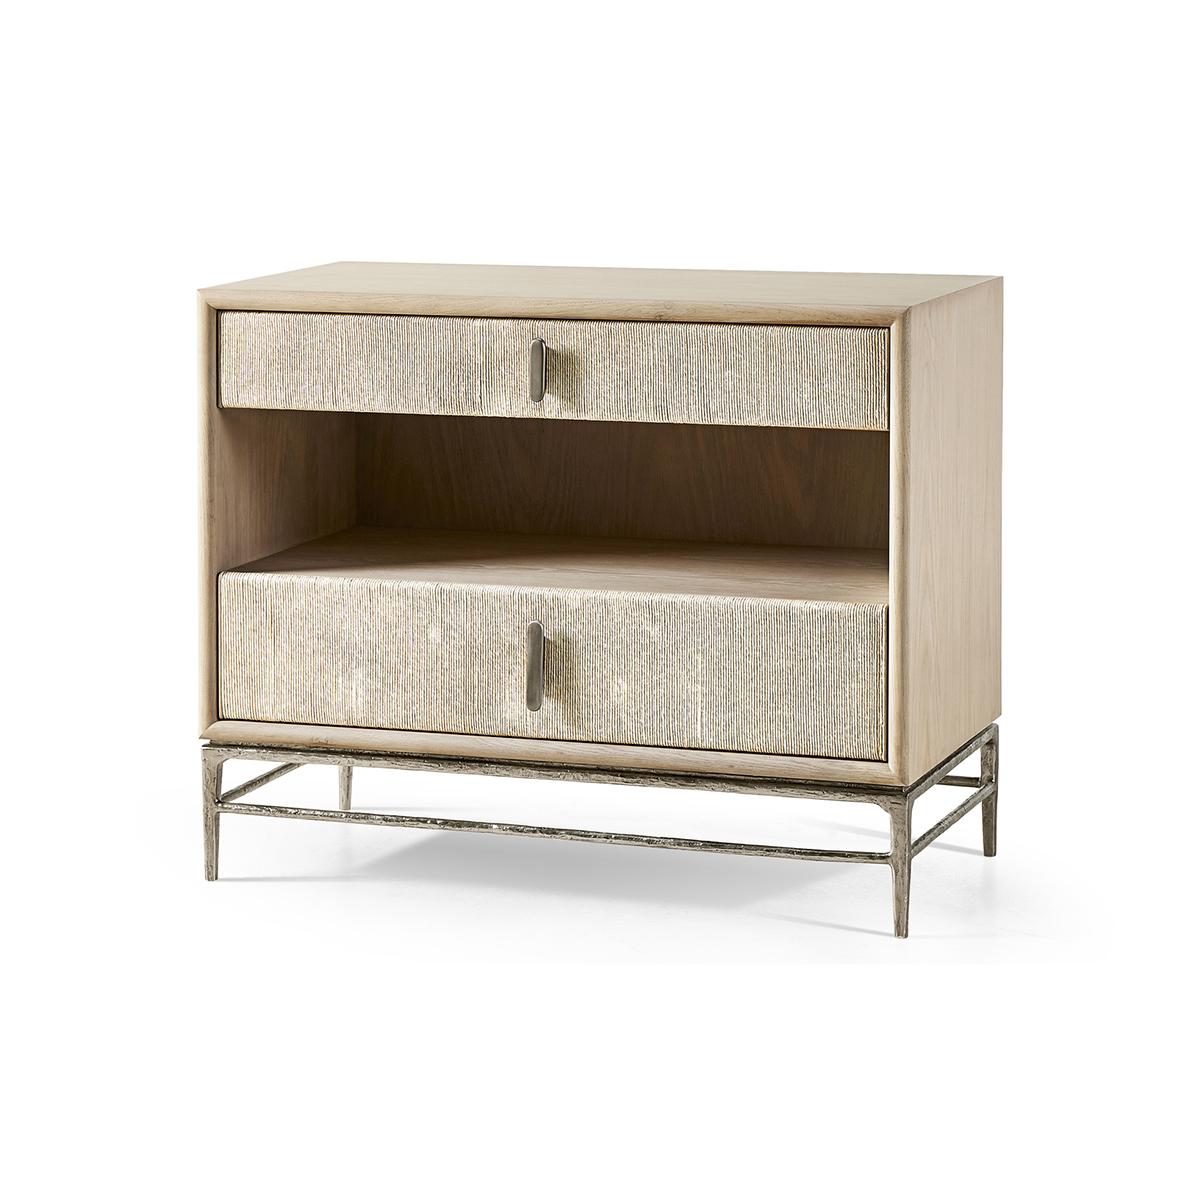 Danish cord nightstand, replete with two Danish cord-wrapped drawer fronts adding style to the classic tone and feel of contemporary vision without shortcuts. A cast stainless steel base and hand-cast vertical hardware are finished in elegant satin